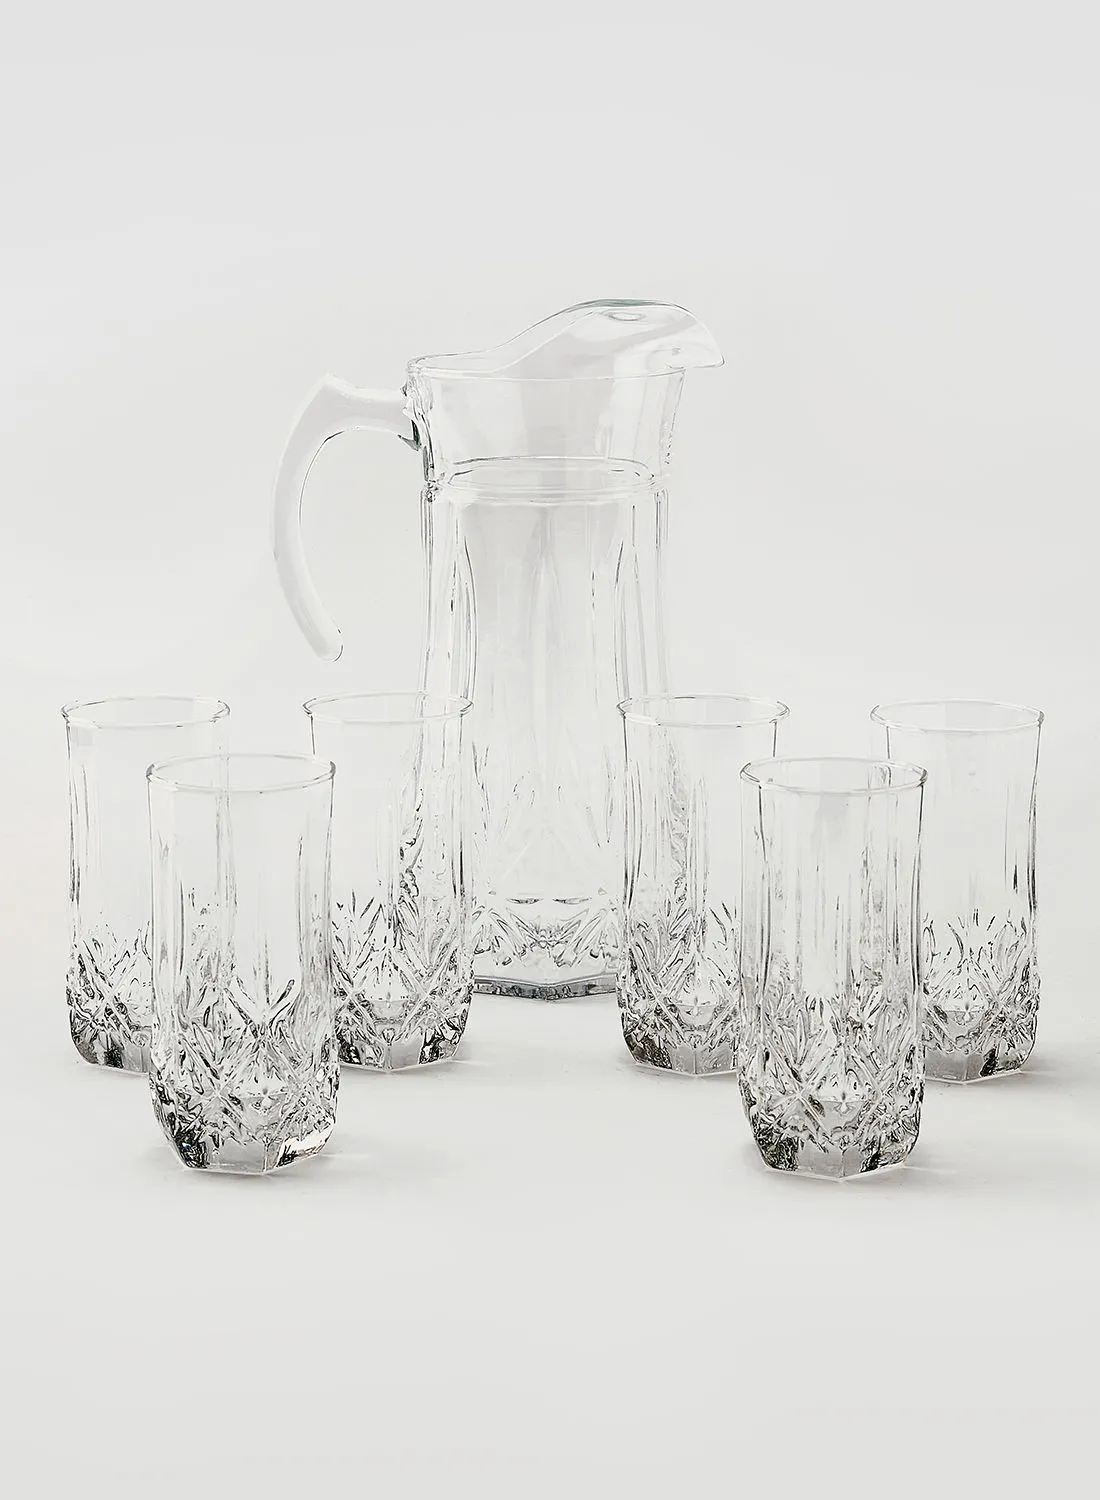 Noon East 7 Piece Glass Drink Set Beverage Glasses For Juices - By Noon East - Jug 1.6 L, Tumblers 30 Cl - Serves 6 - Crystal Crystal Jug 1.8 L + 6 Tumblers 300ml